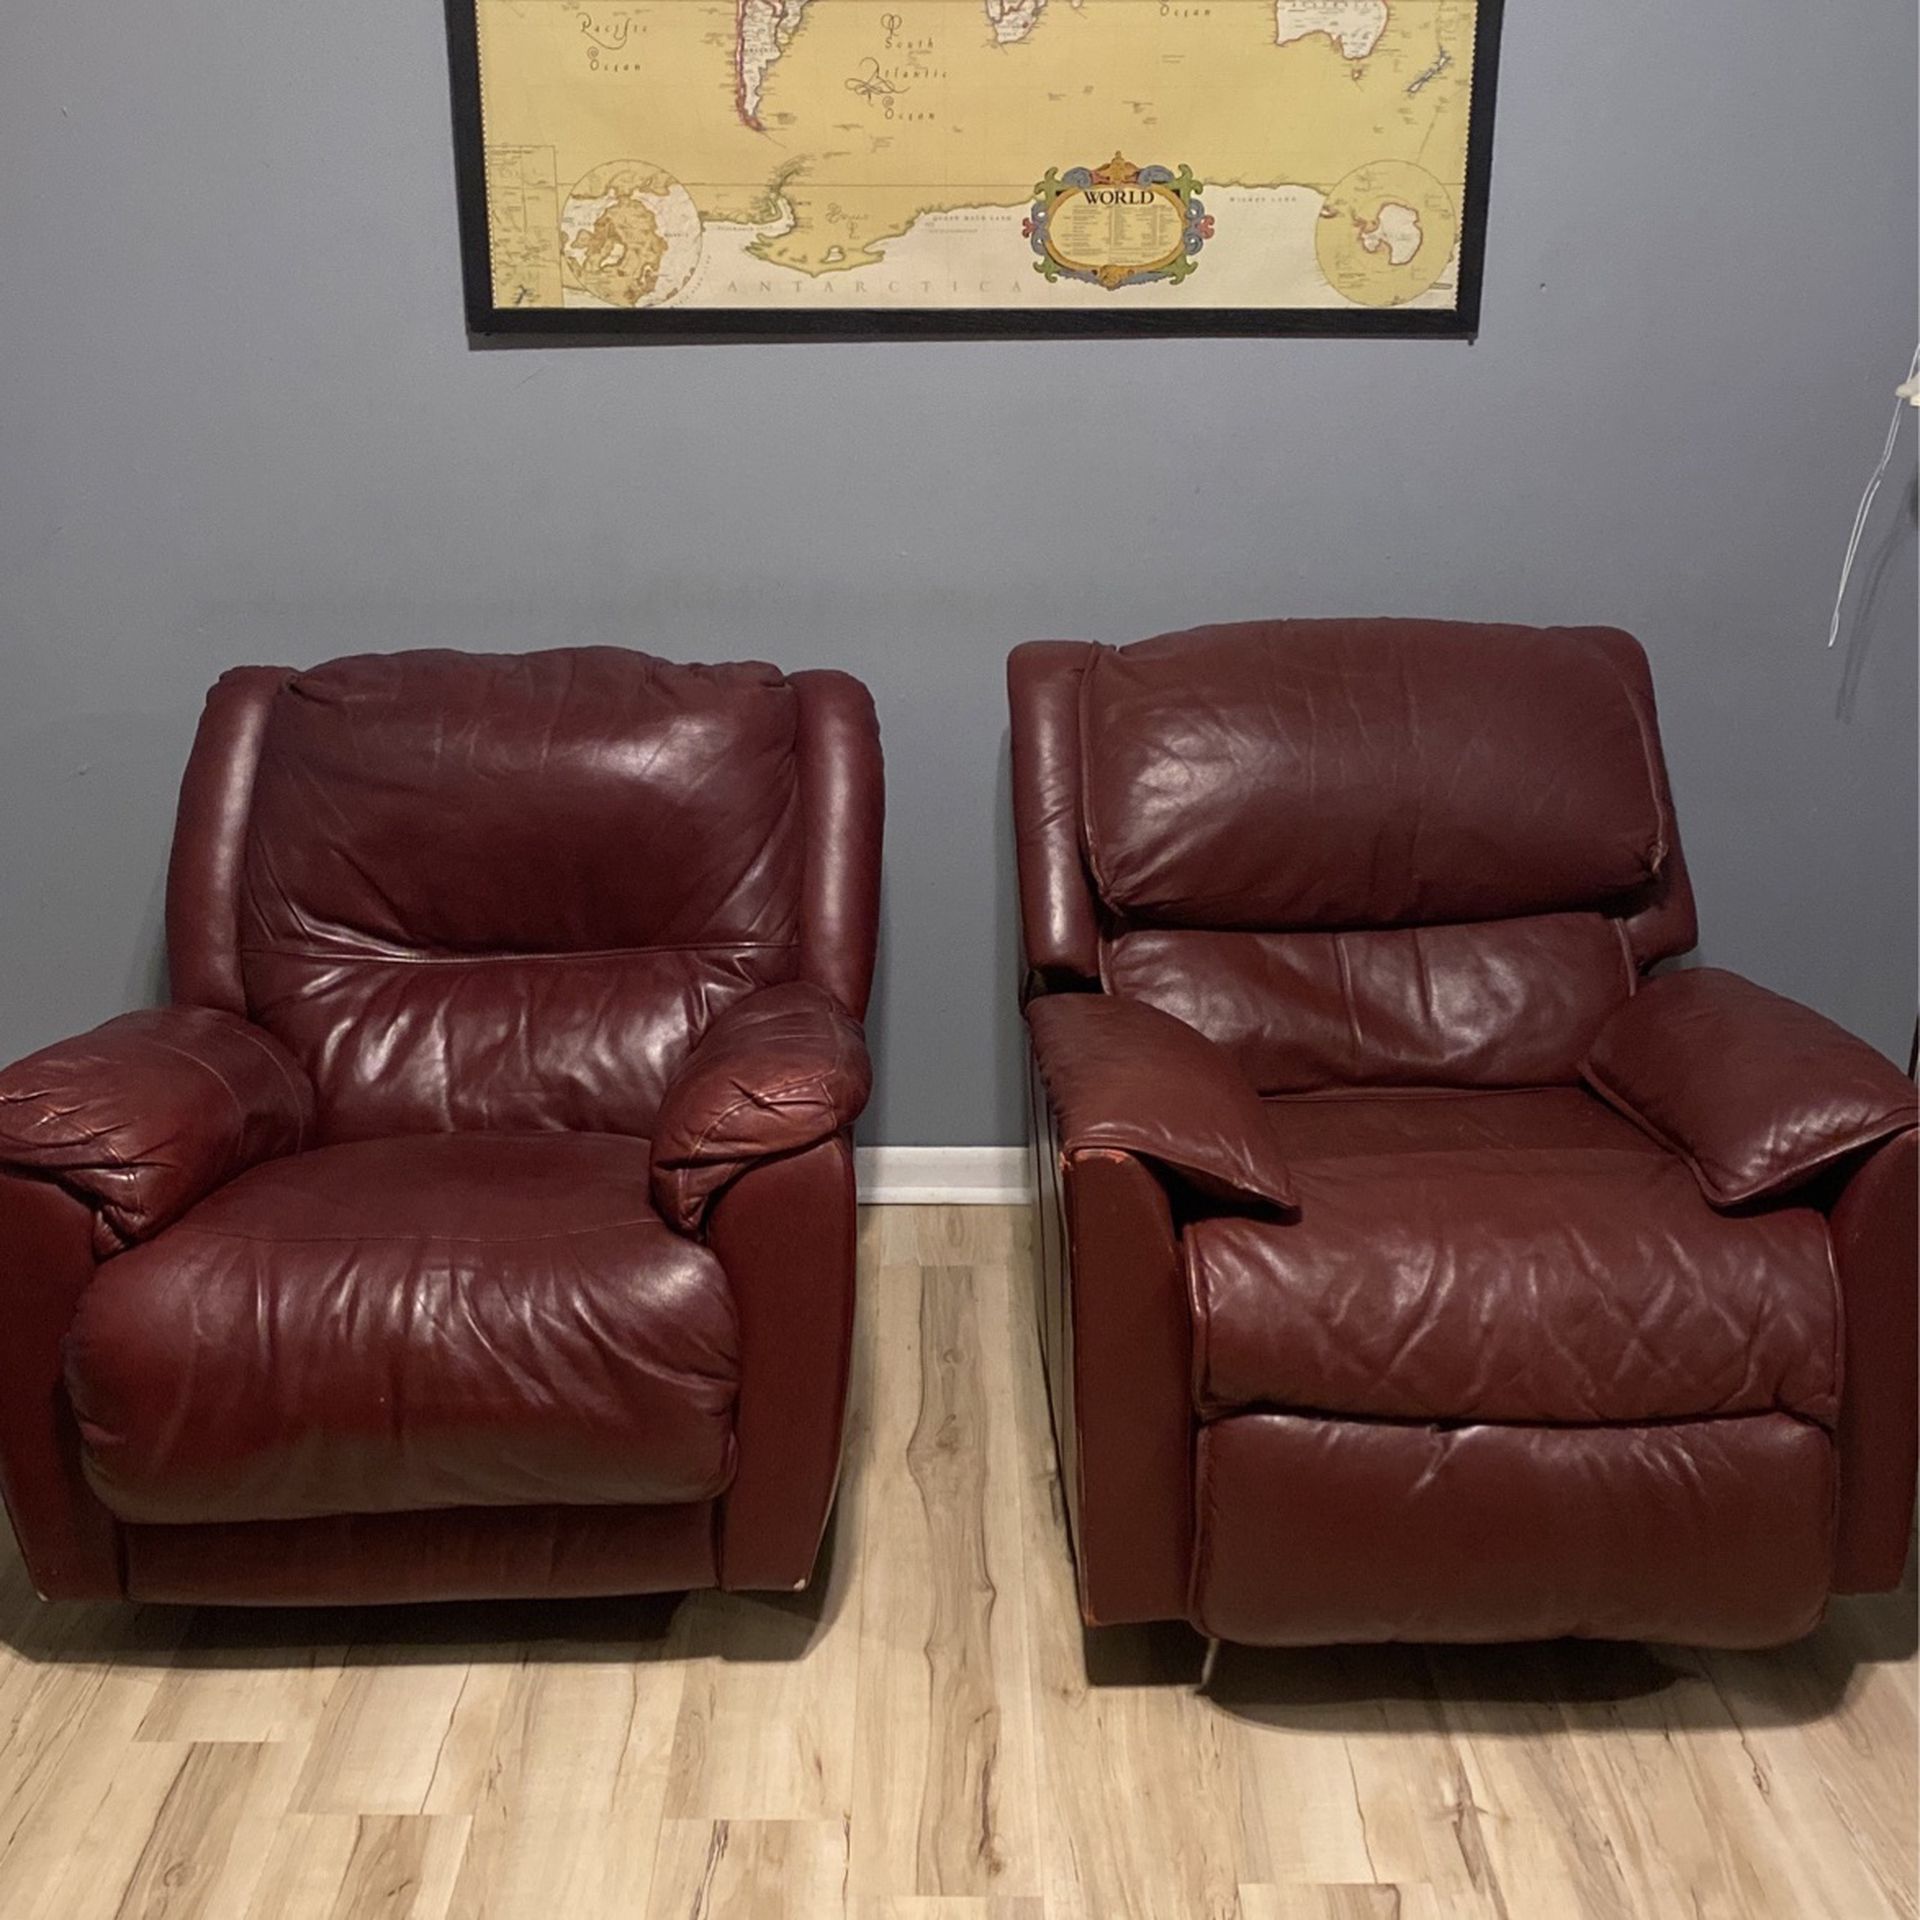 2 Leather Recliners $75 Each. Will Sell Separately 